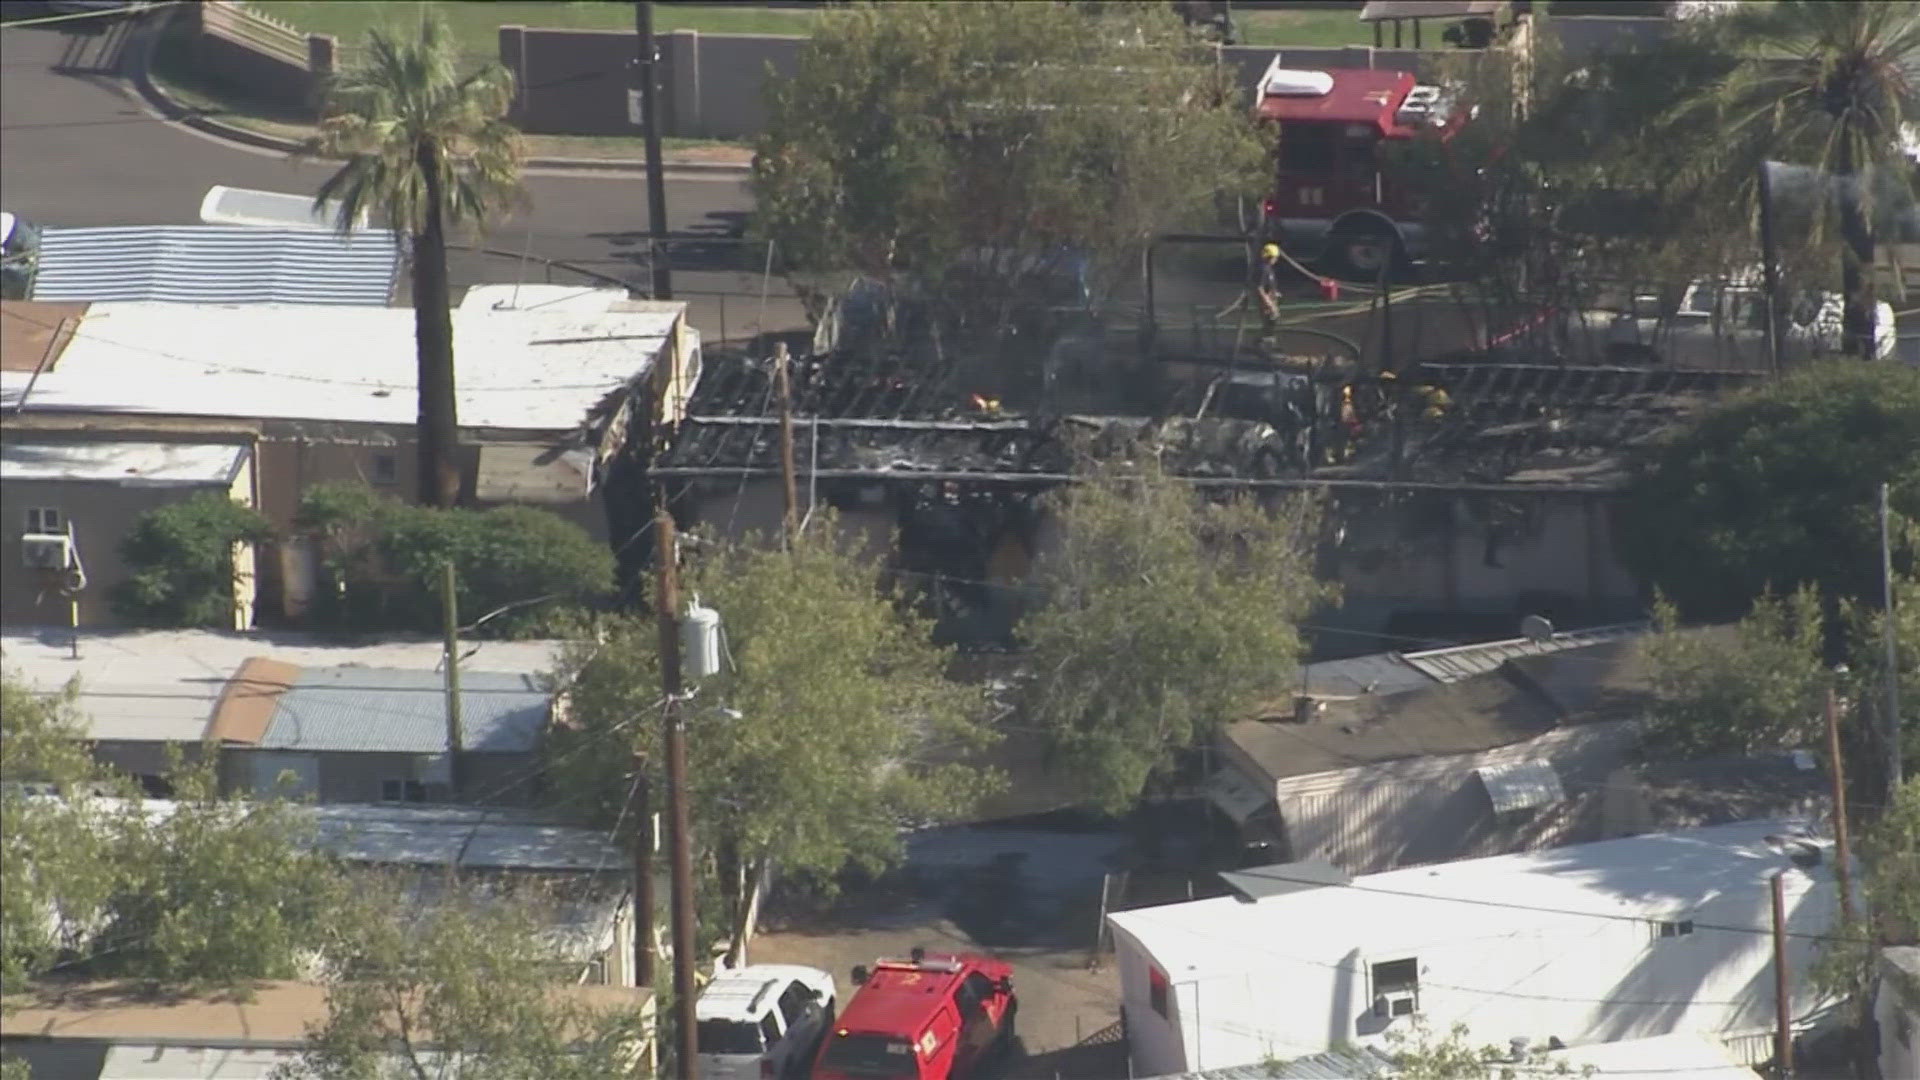 The fire broke out near 32nd street and McDowell road.